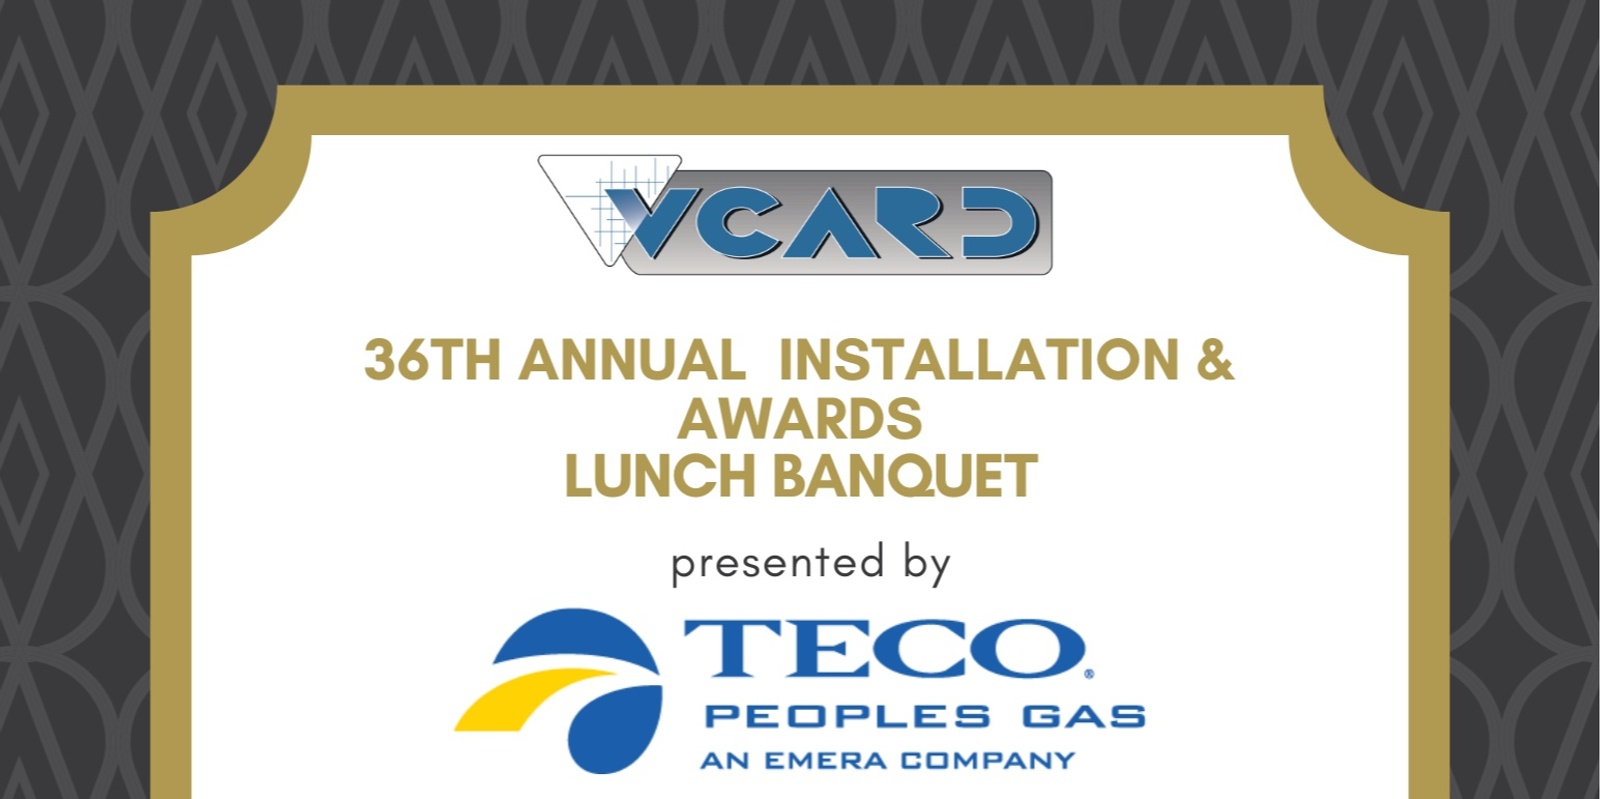 Banner image for VCARD's 36th Annual Installation & Awards Lunch Banquet